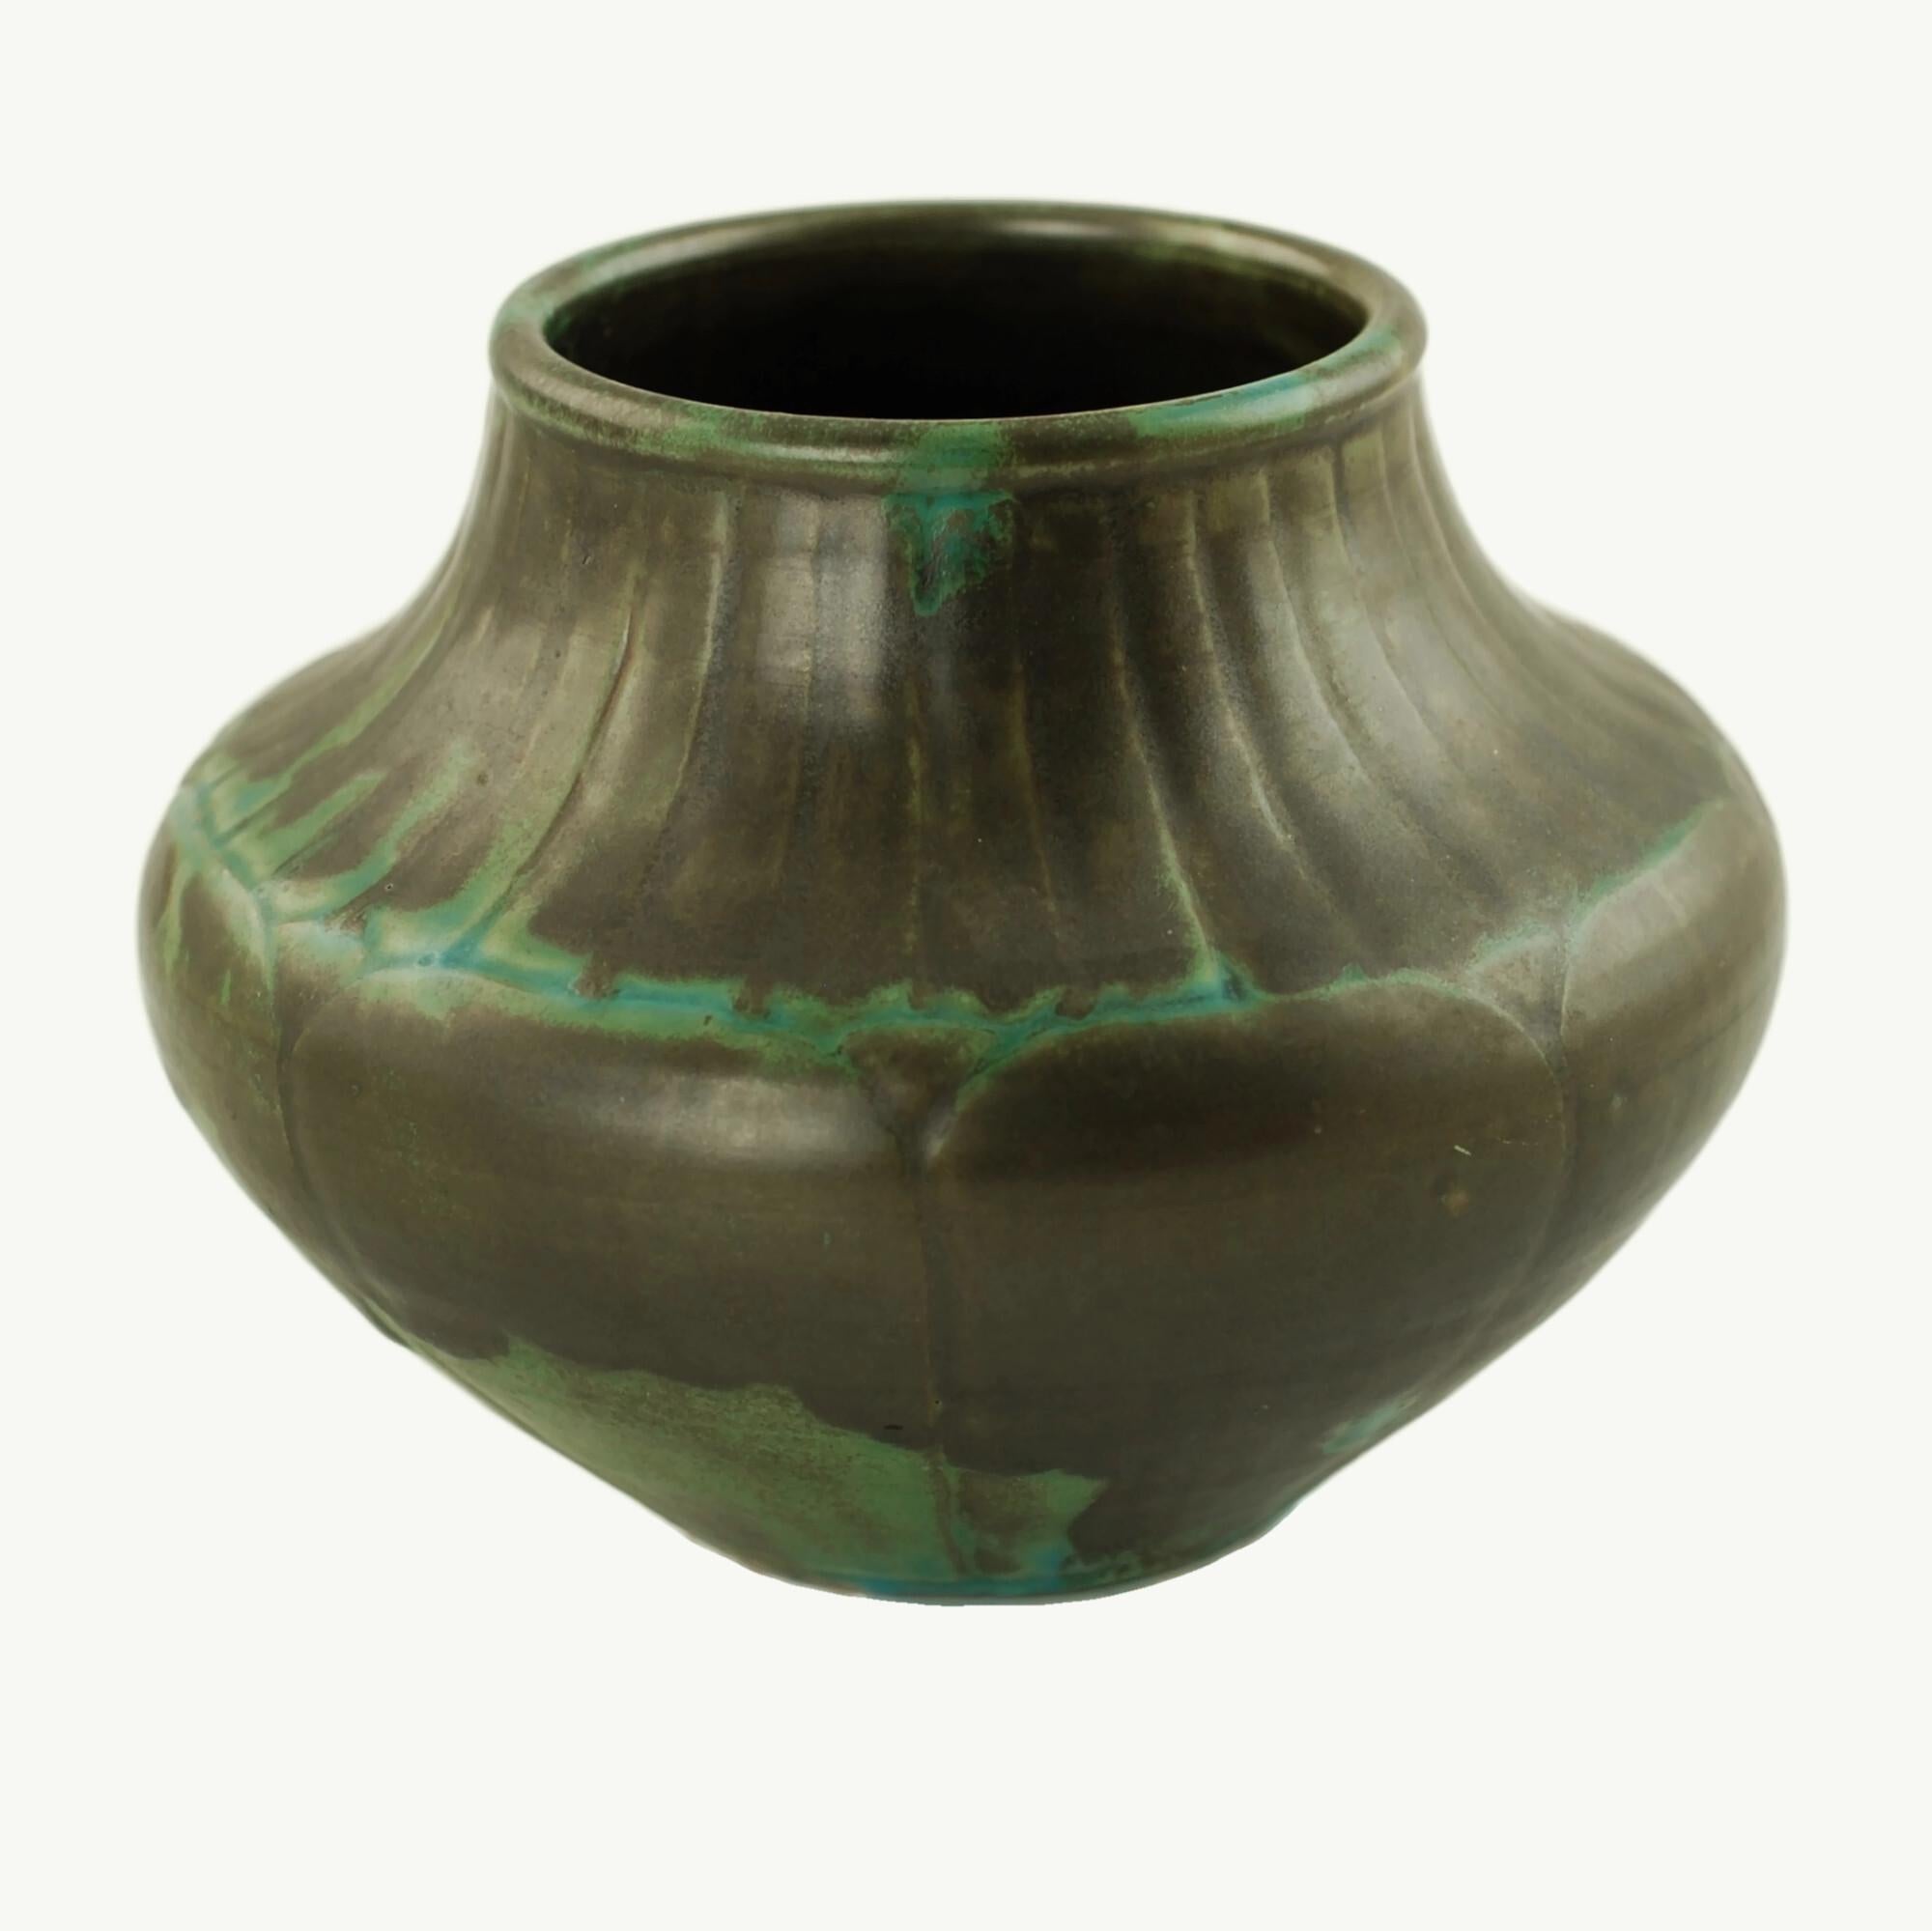 This beautiful vase was made by renowned Shearwater Pottery of Ocean Springs, Mississippi. Shearwater was founded in 1928 by Peter Anderson and went on to establish a reputation for creating innovative and unique art pottery. The pottery was